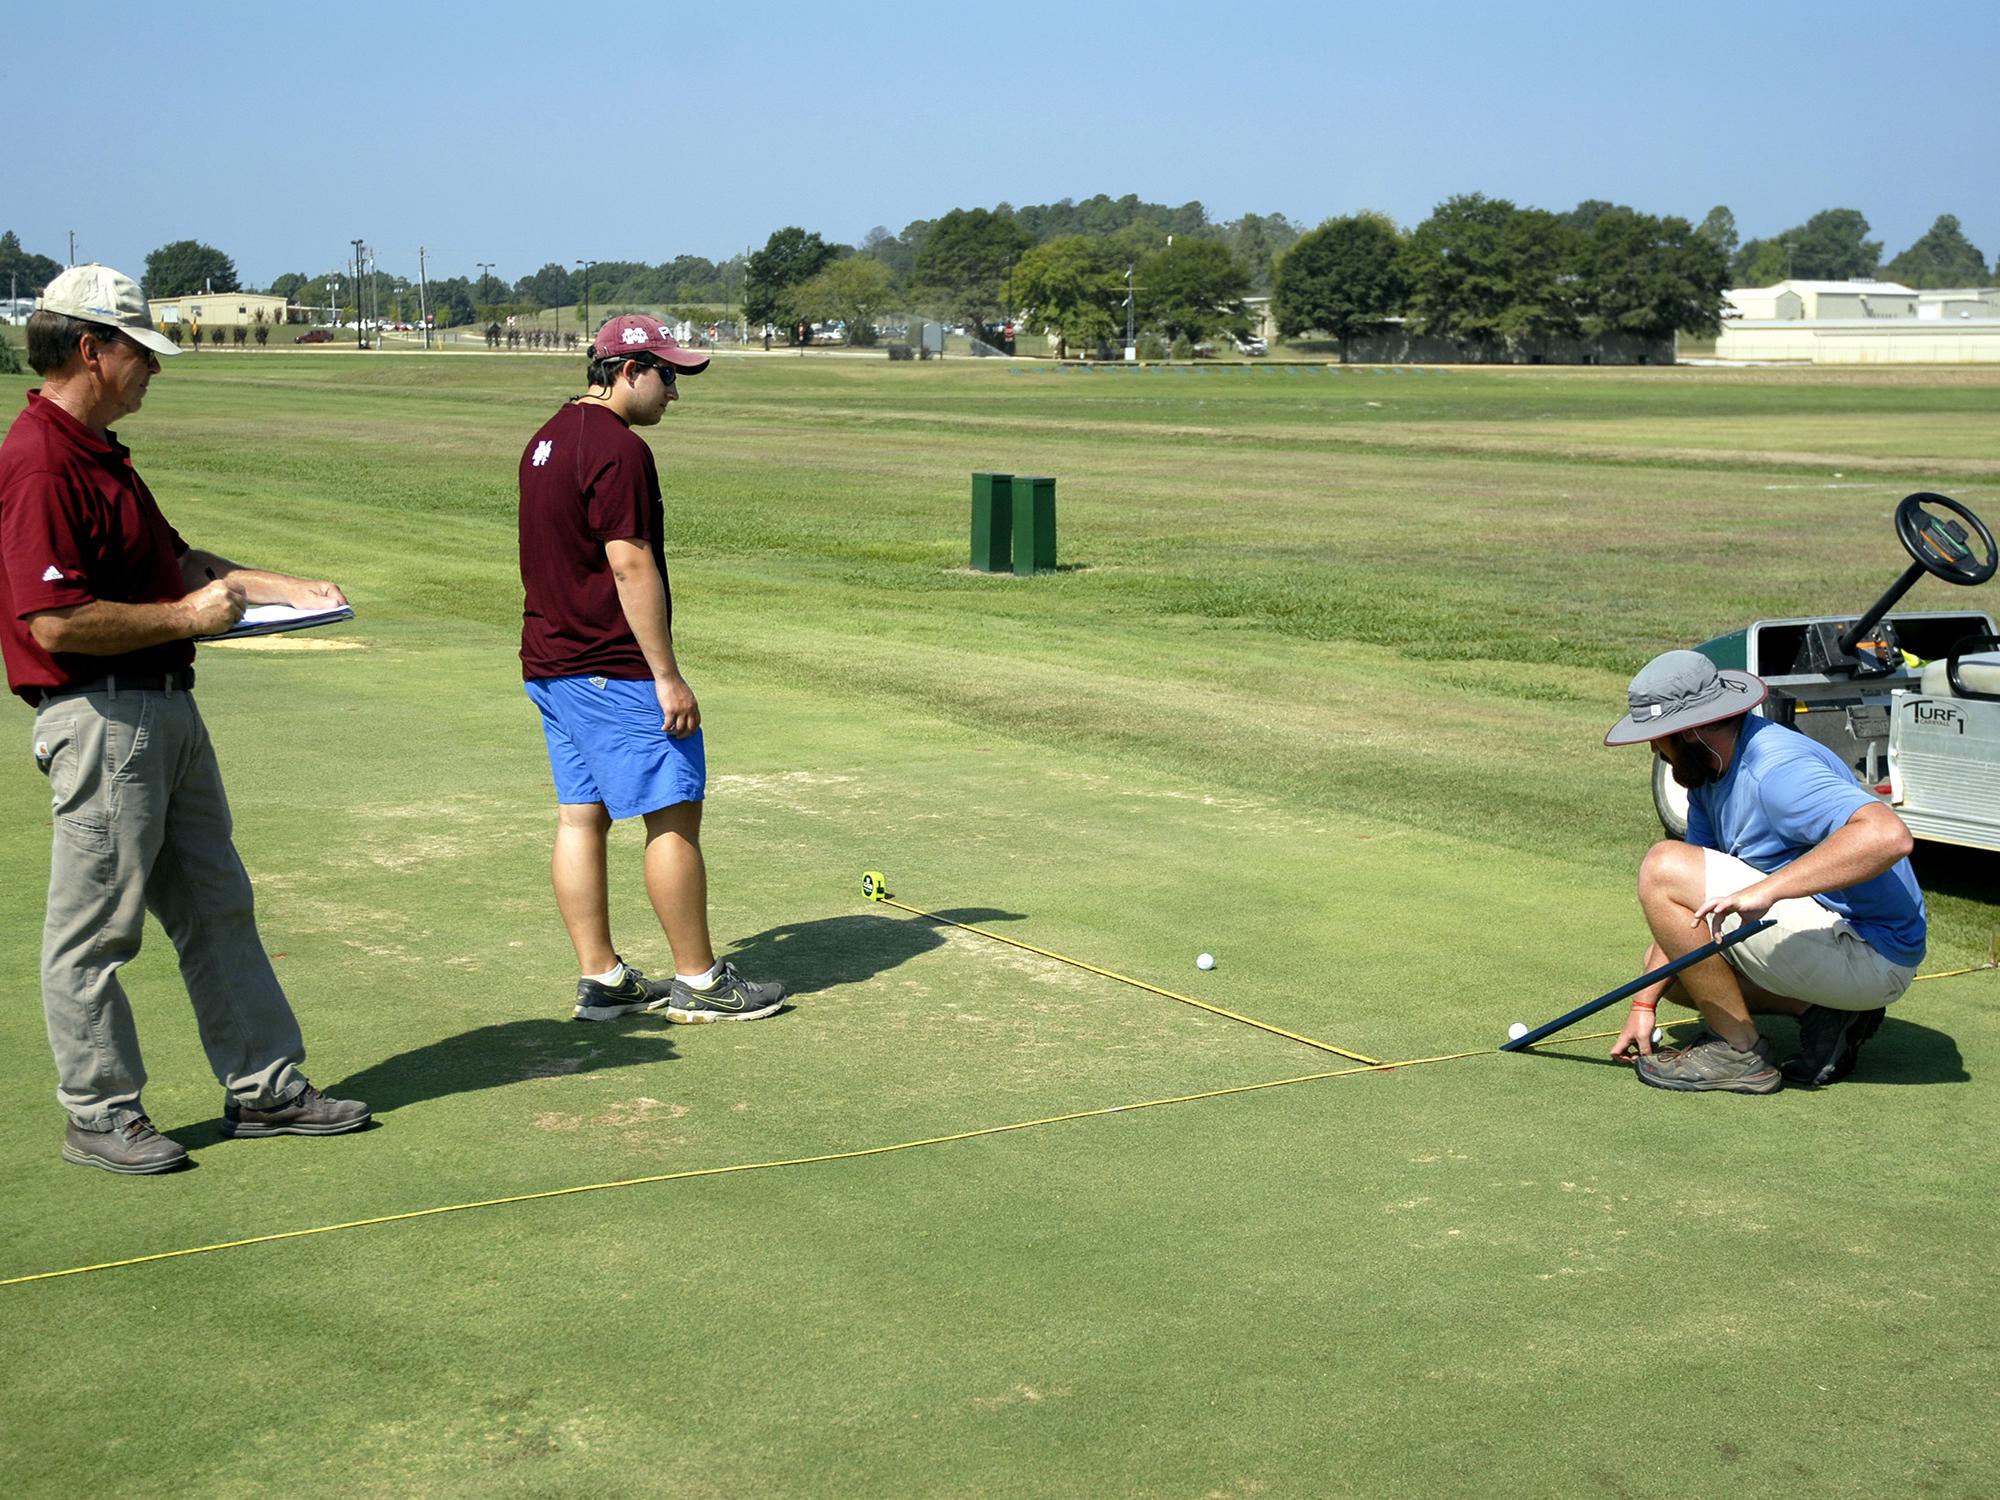 Mississippi State University Department of Plant and Soil Sciences senior research associate Wayne Philley, left, and MSU seniors Abram Diaz of D’Iberville and Aaron Tucker of Carthage measure how far a golf ball rolls over different varieties of bermudagrass at the R. R. Foil Plant Science Research Center Sept. 4, 2015. (Photo by MSU Ag Communications/Nathan Gregory)